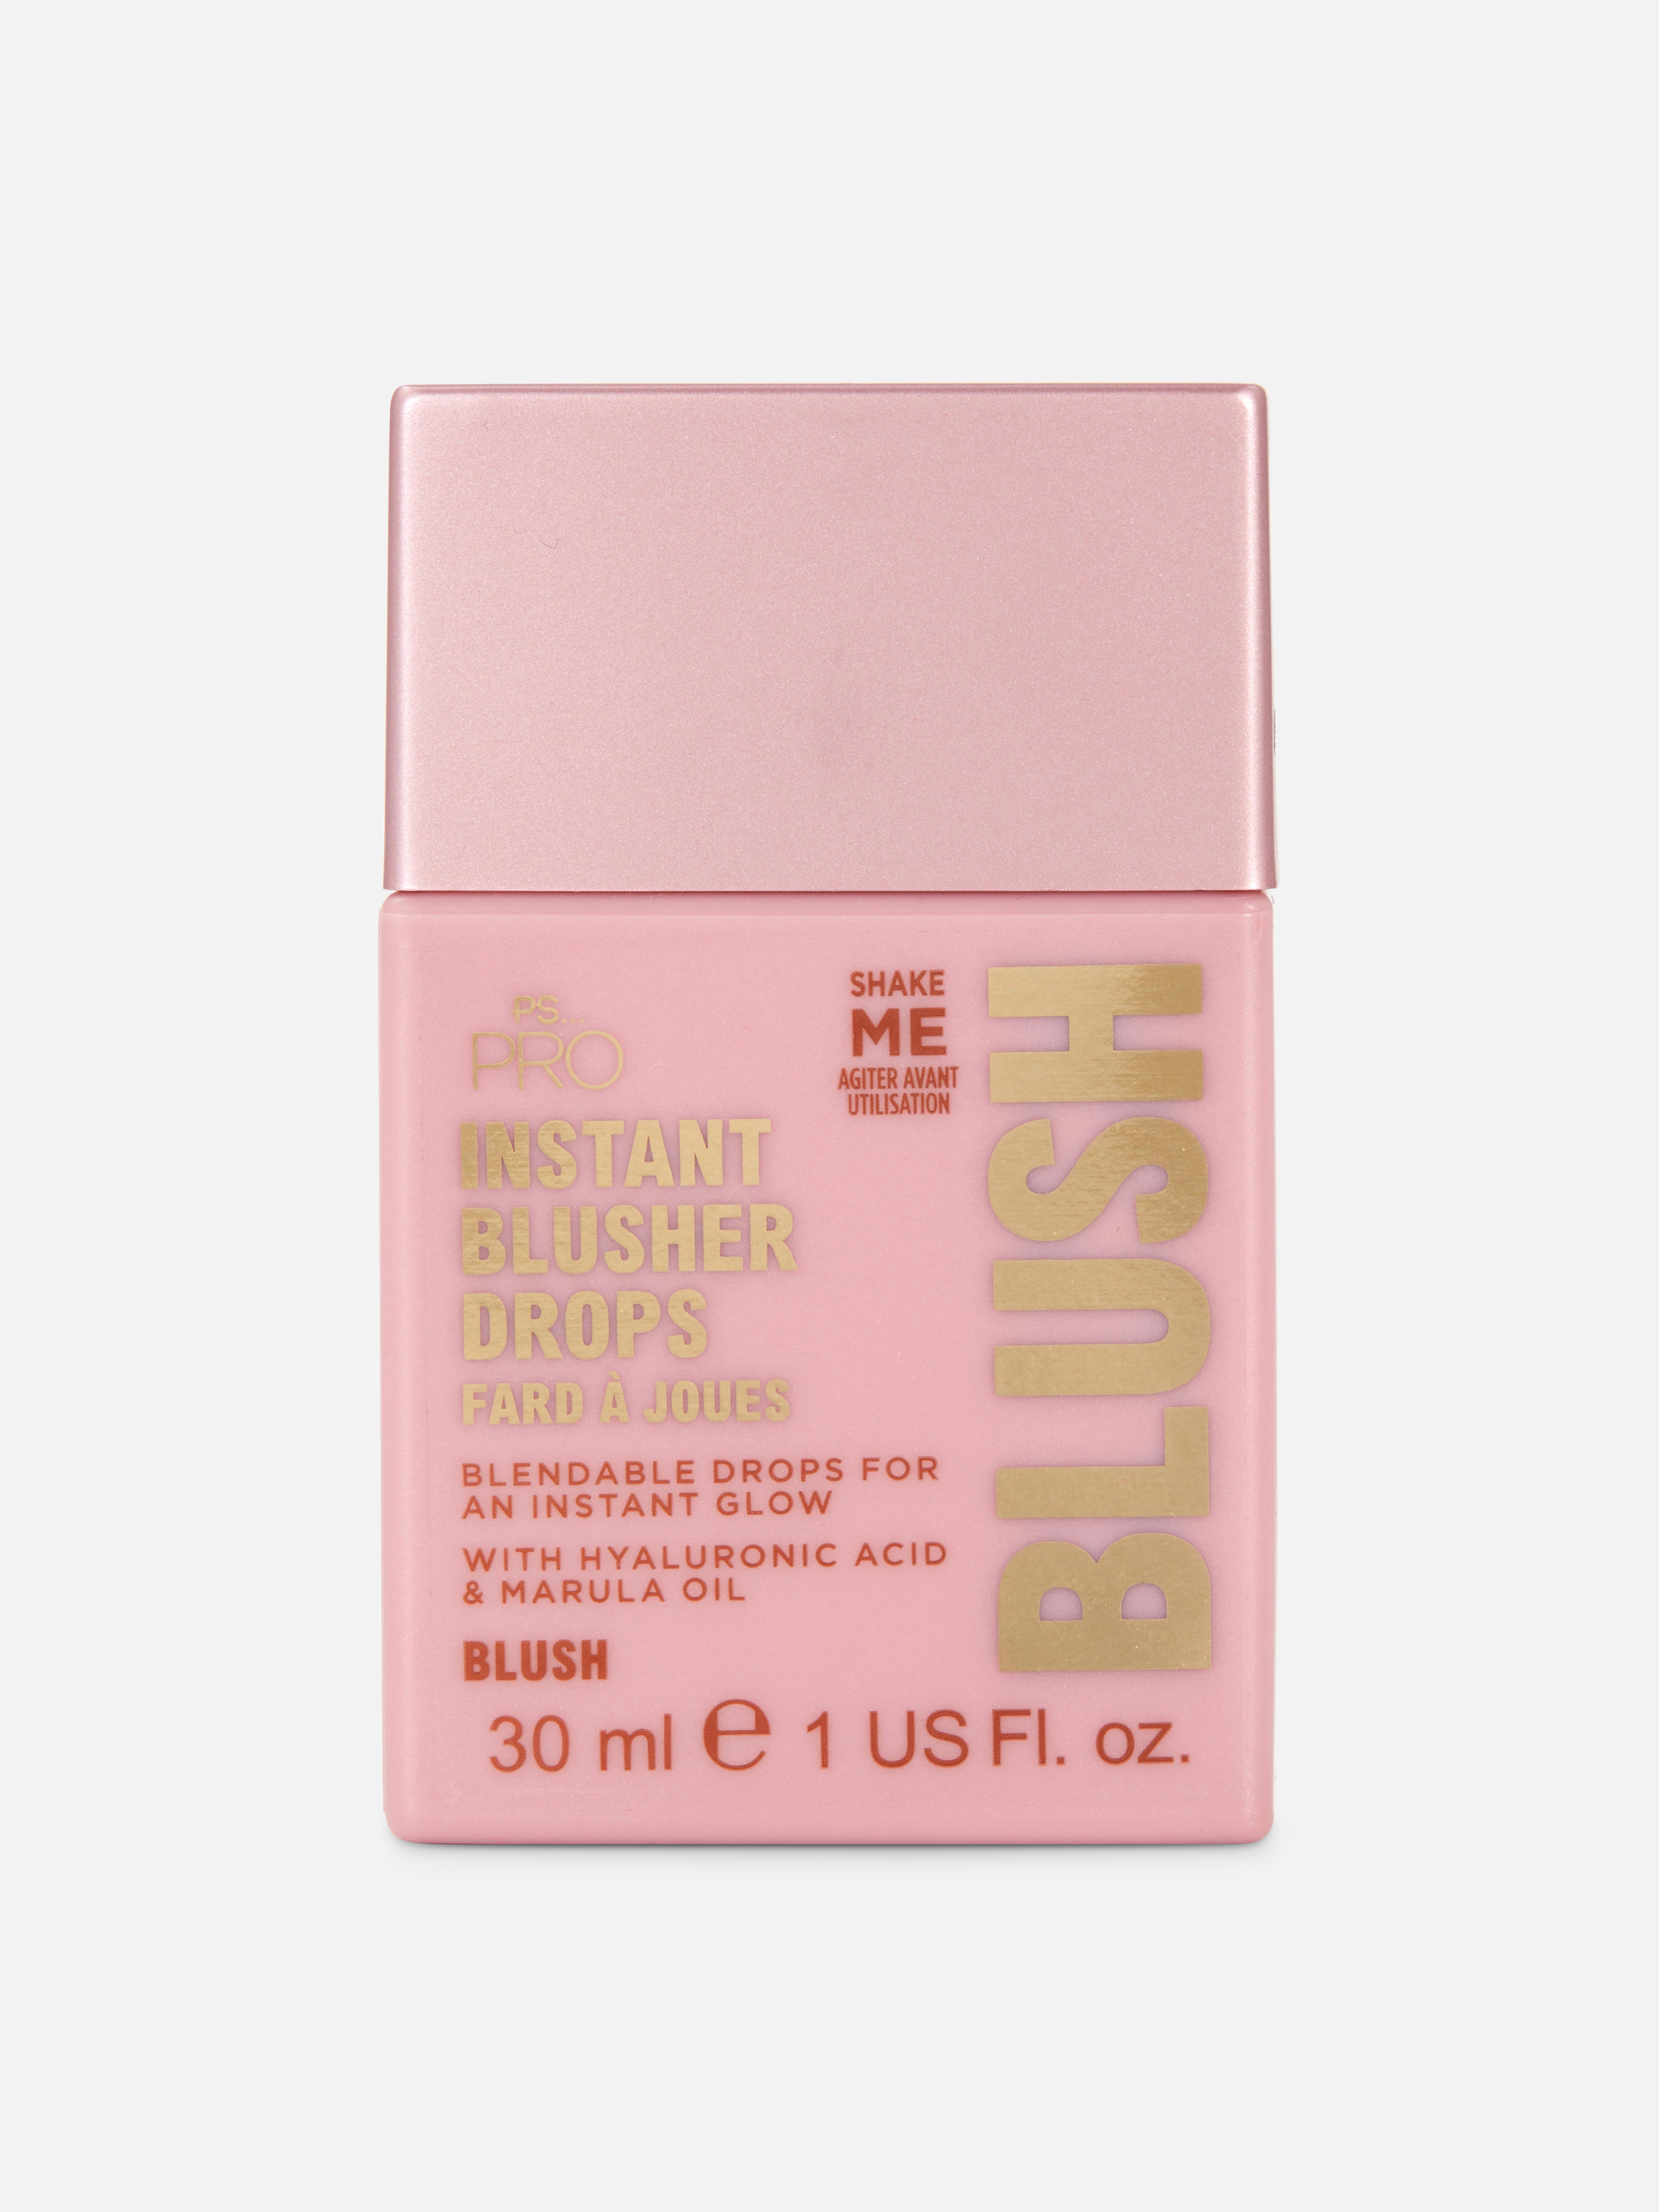 PS... Instant Blusher Drops Pro